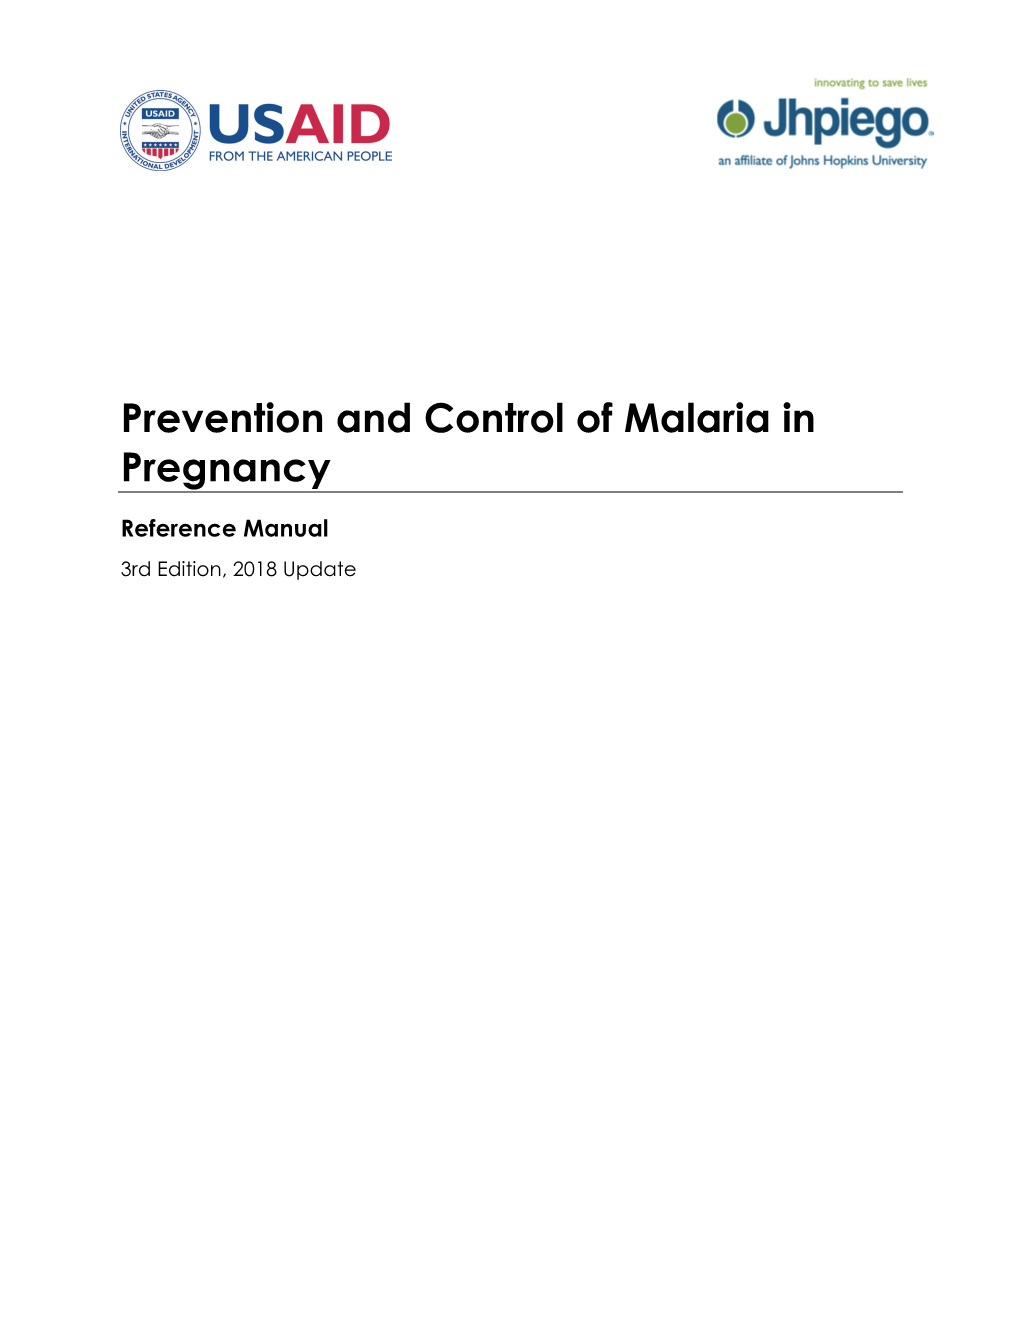 Prevention and Control of Malaria in Pregnancy: Reference Manual. 3Rd